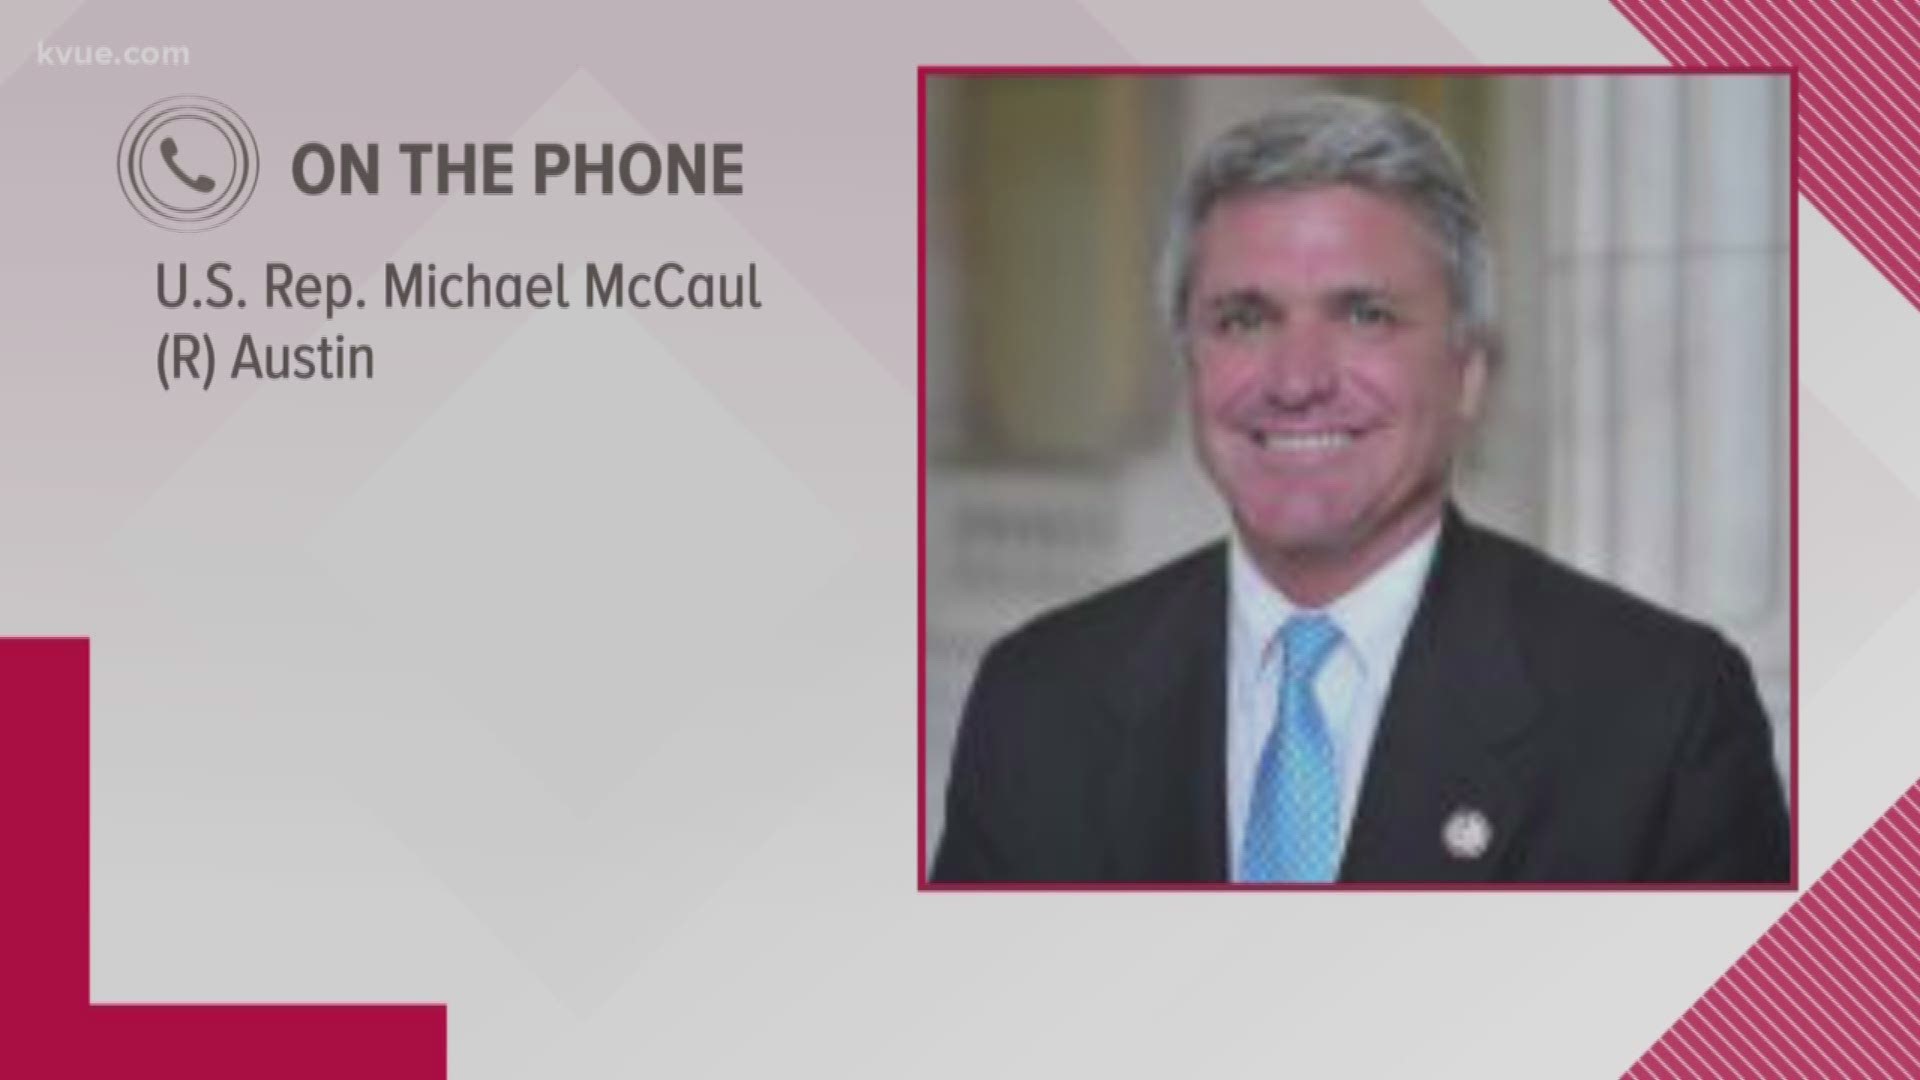 Texas Republican Rep. Michael McCaul talked to KVUE from inside the U.S. Capitol after rioters stormed the building on Jan. 6.